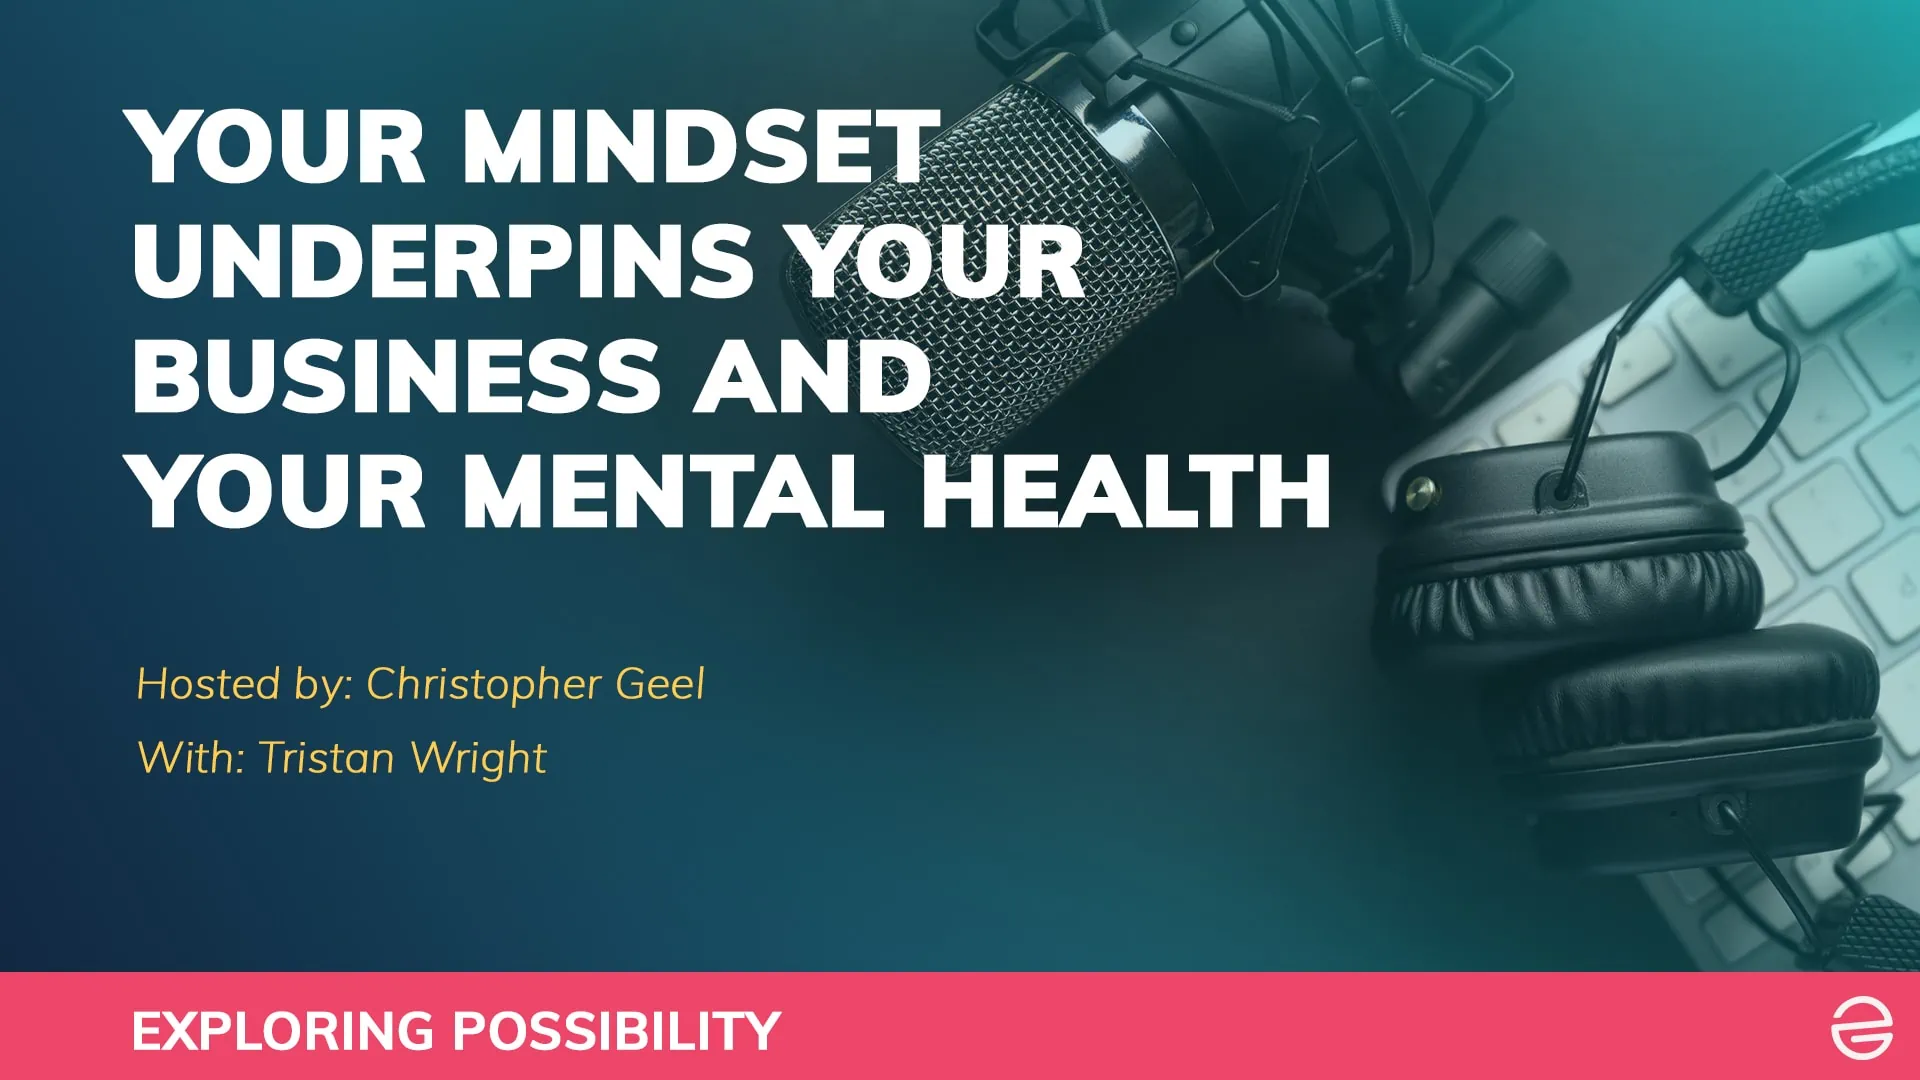 Your Mindset Underpins Your Business And Your Mental Health